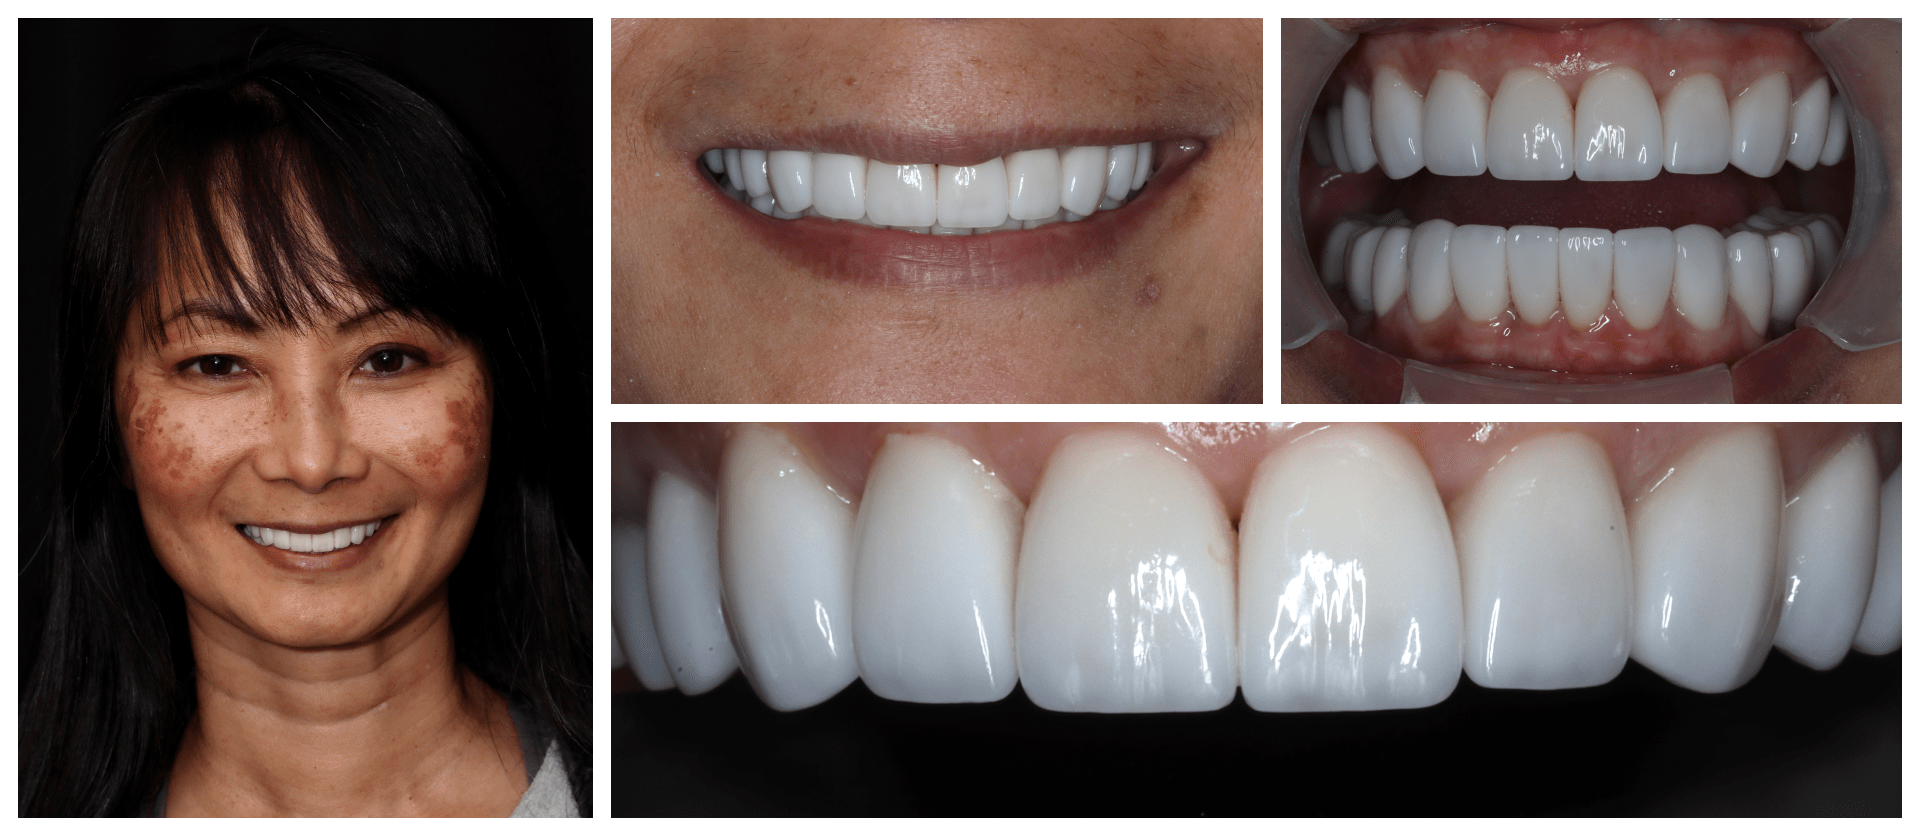 Before-and-after dental collage captures the heartwarming stories of transformed individuals, reflecting the expertise and care of our dental team